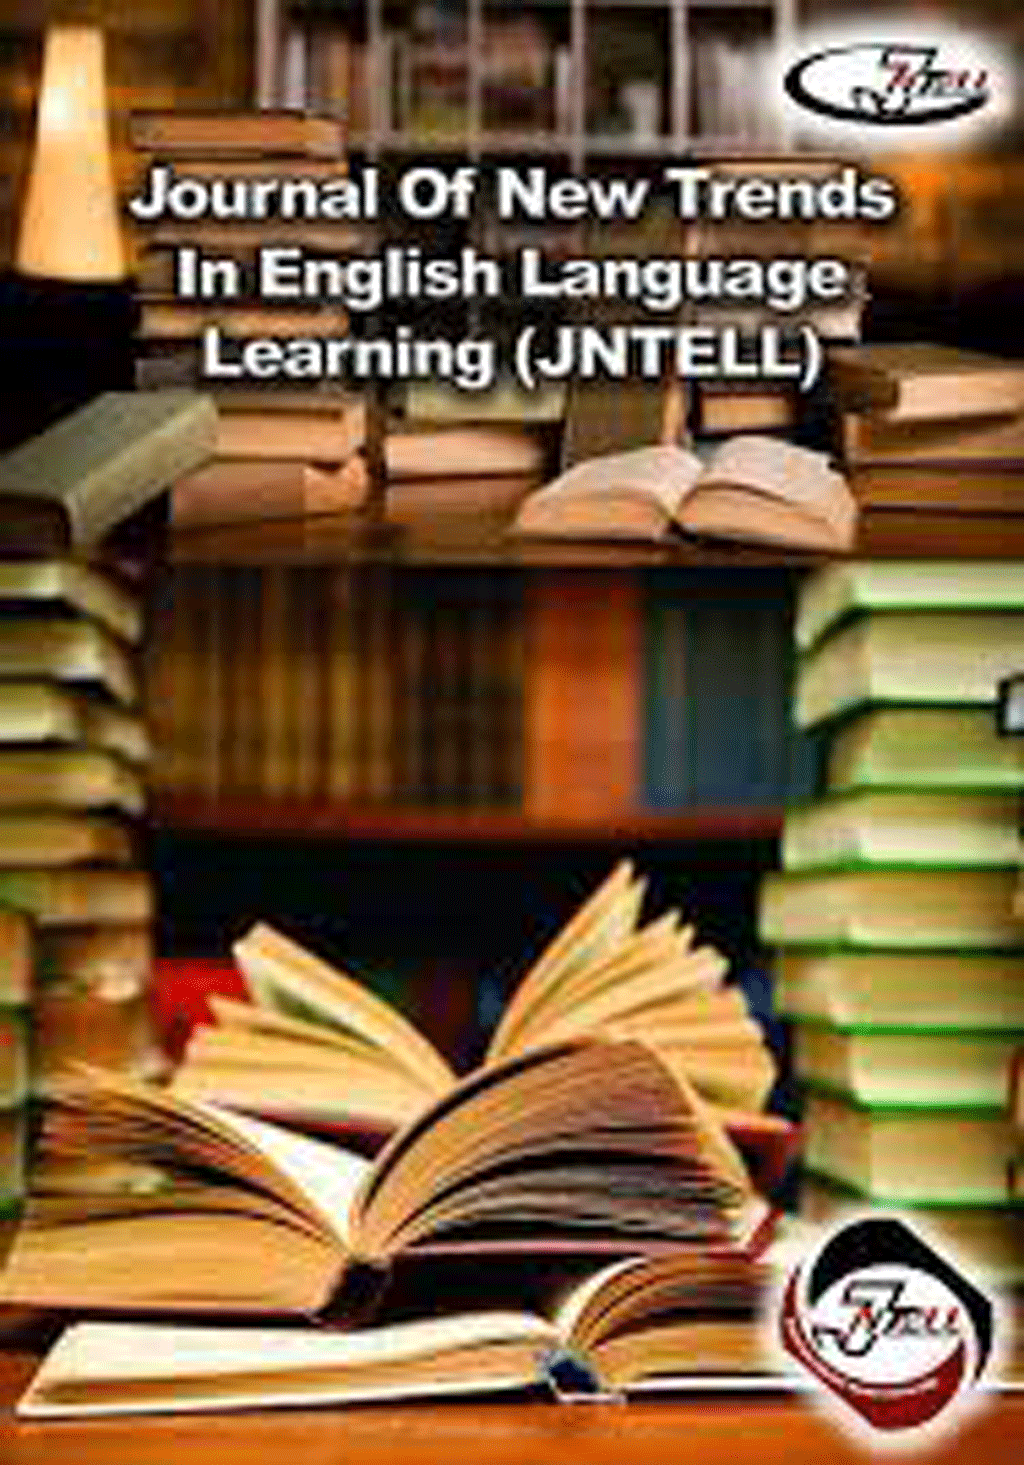 Journal of New Trends in English Language Learning - Autumn 2022, Volume 1 - Number 2